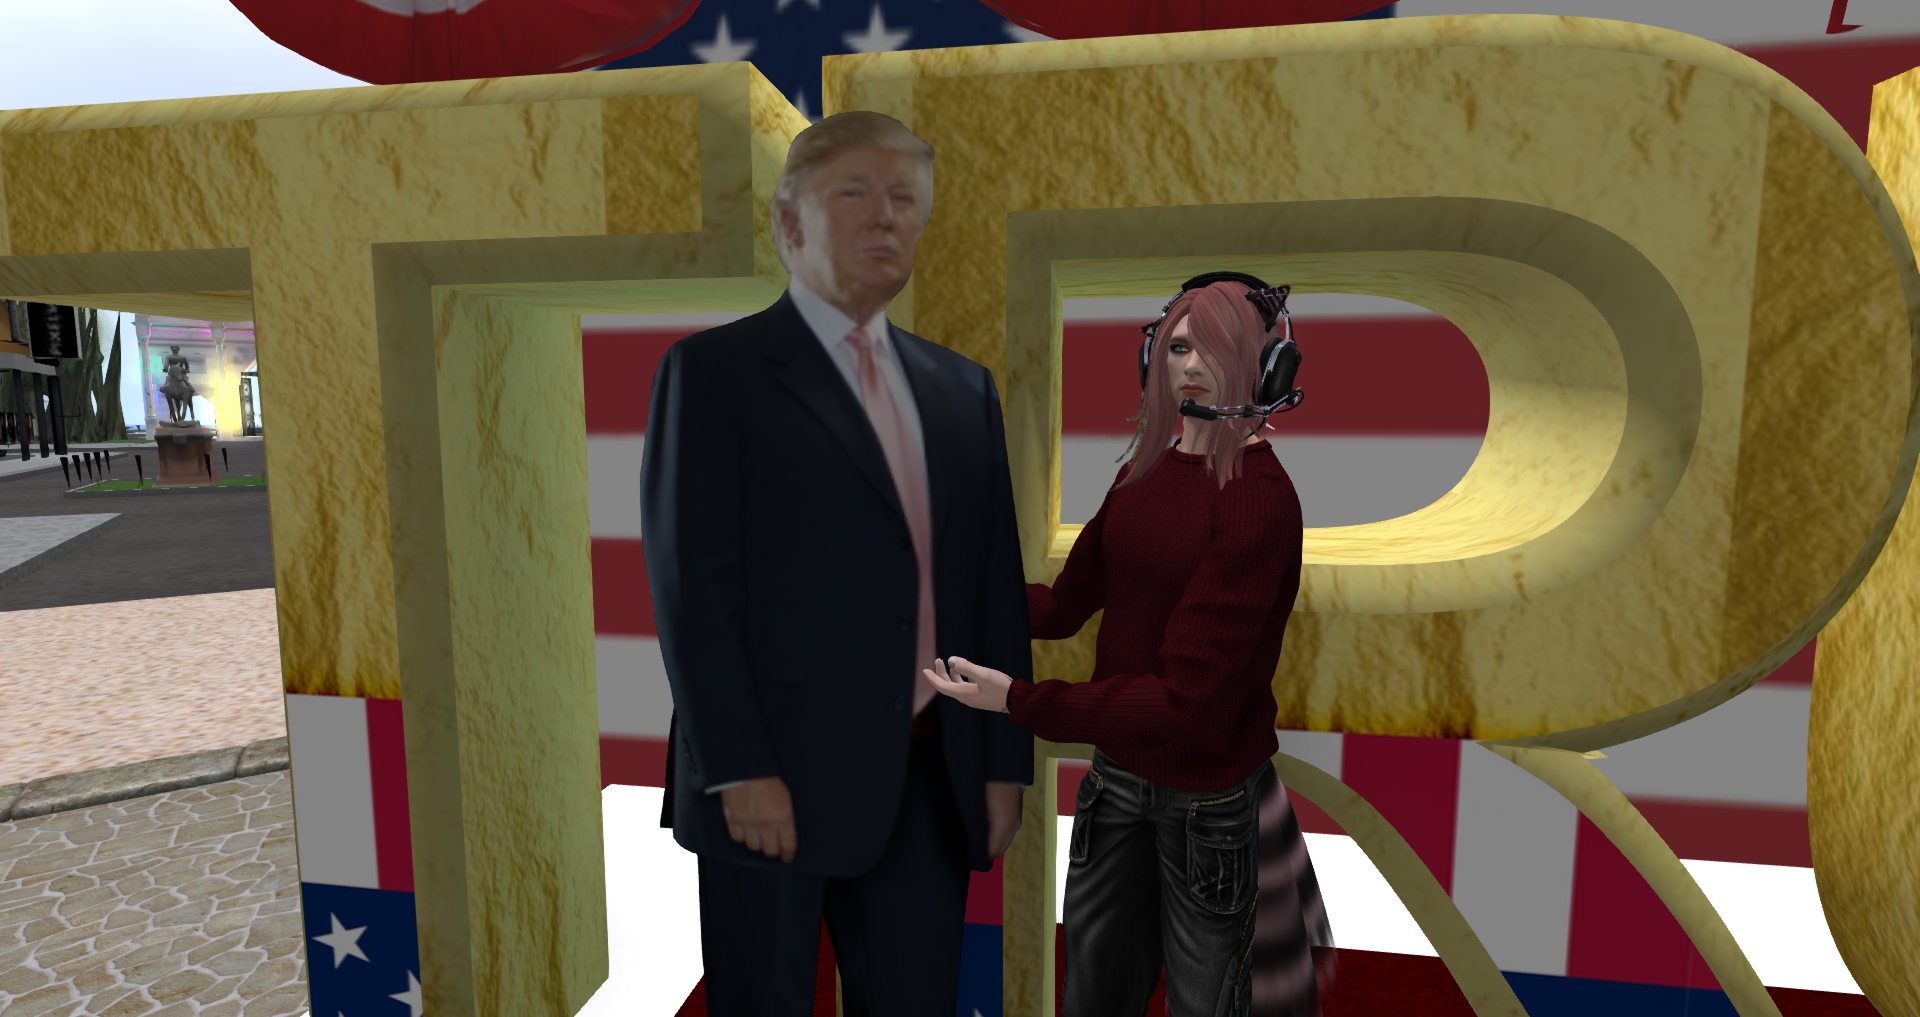 Meanwhile, At The Second Life Trump Inauguration Party